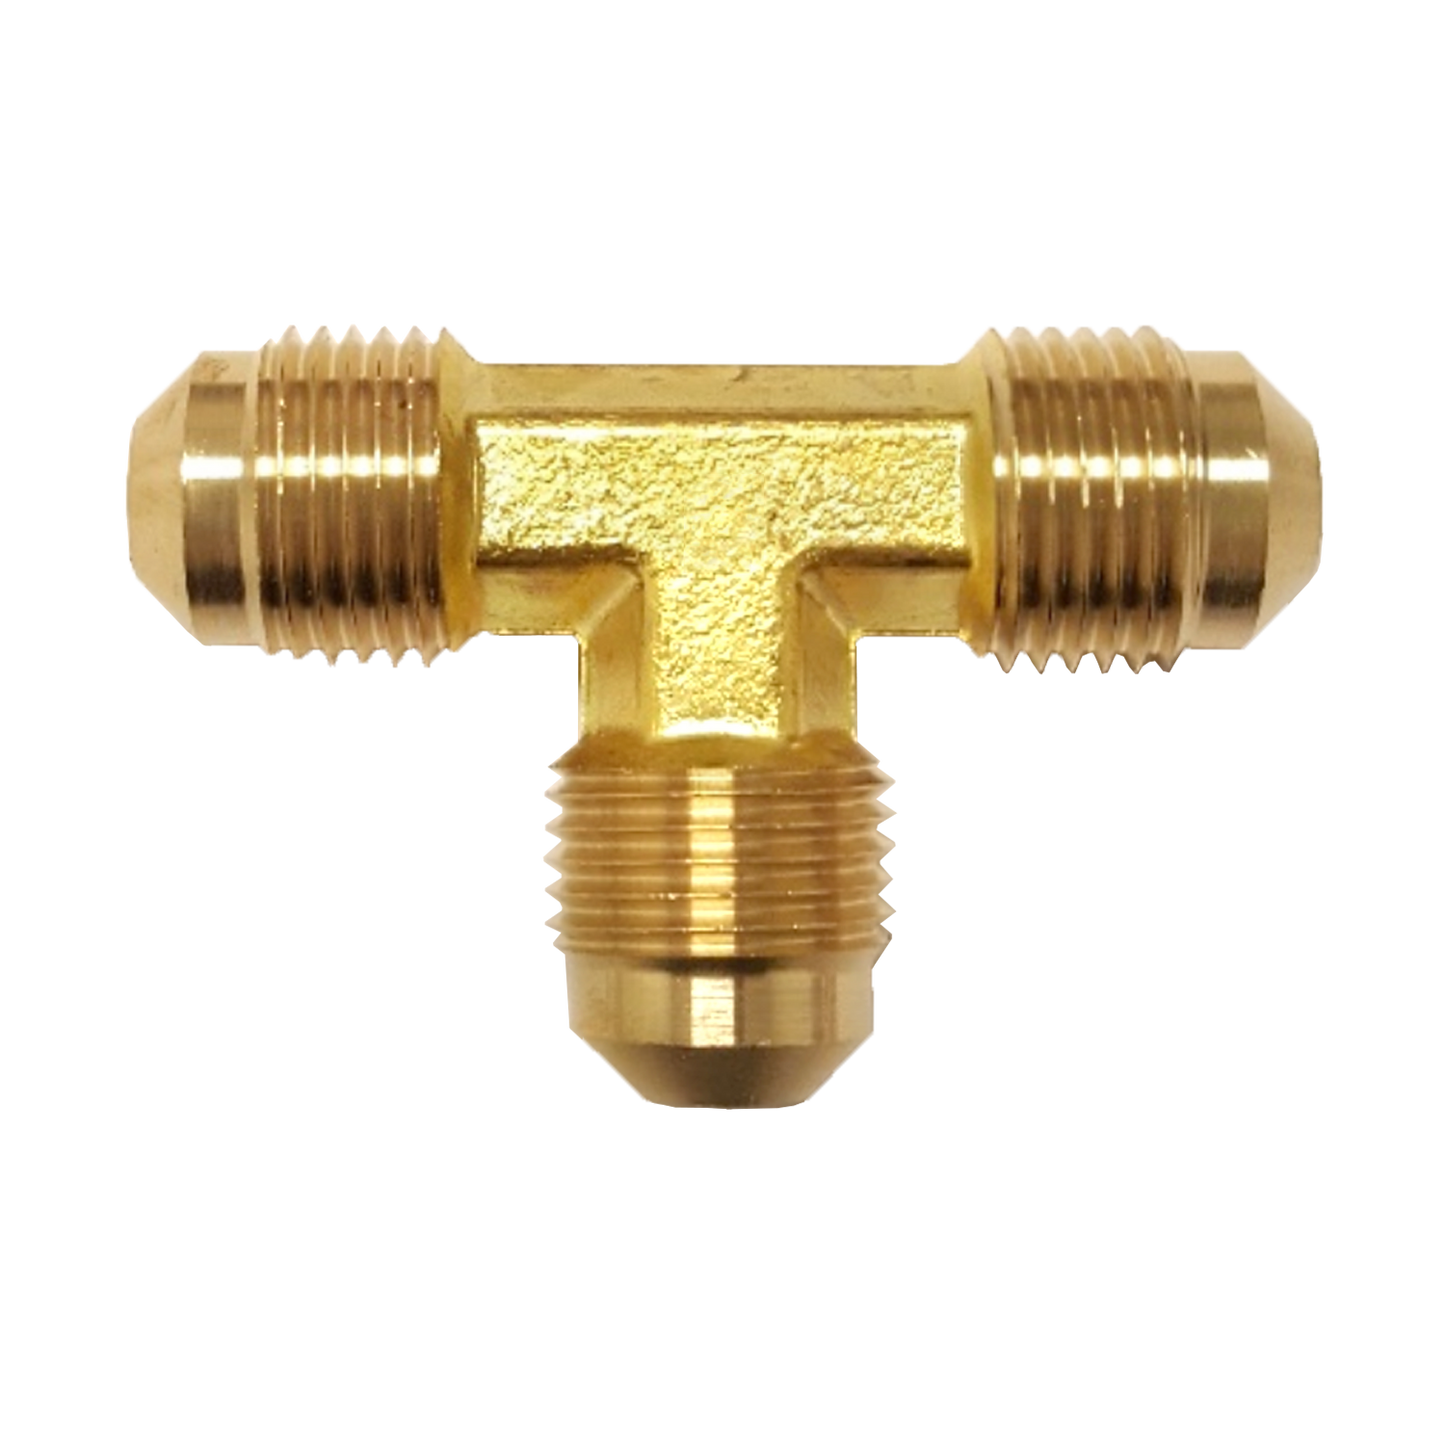 Brass Fitting - 446 3/8" Male Flare Union Tee